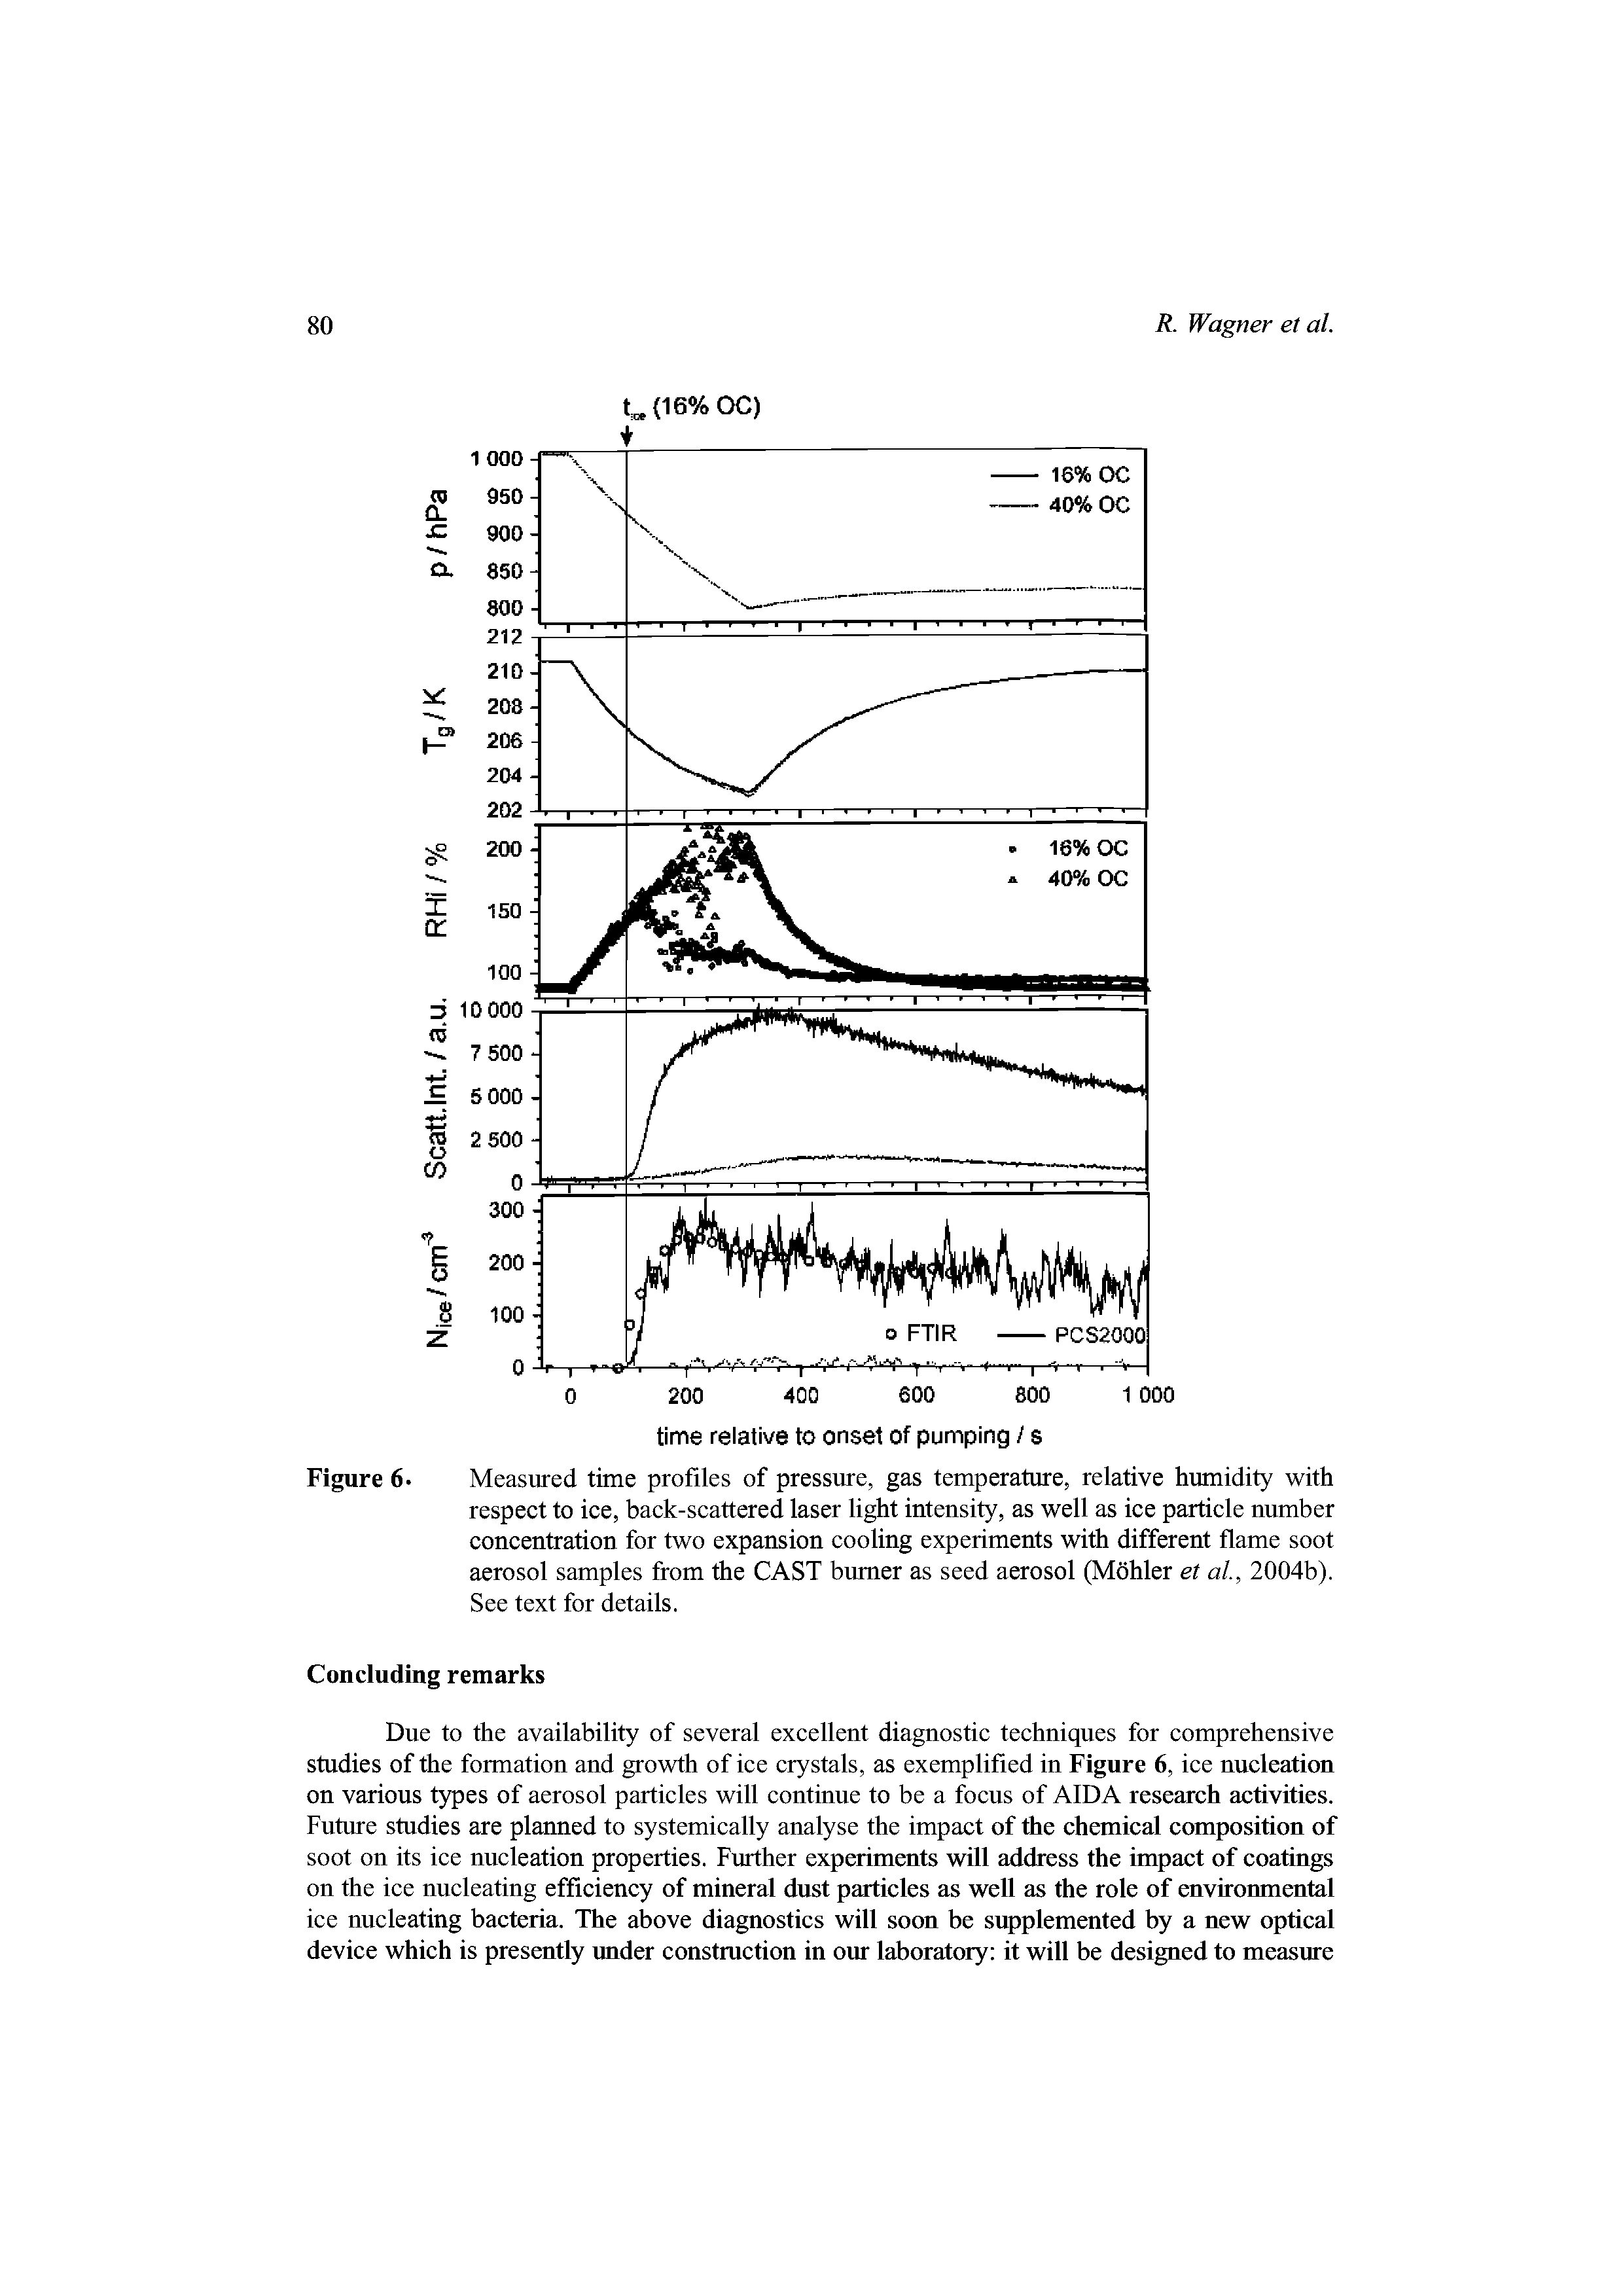 Figure 6- Measured time profiles of pressure, gas temperature, relative humidity with respect to ice, back-scattered laser light intensity, as well as ice particle number concentration for two expansion cooling experiments with different flame soot aerosol samples from the CAST burner as seed aerosol (Mdhler et al, 2004b). See text for details.